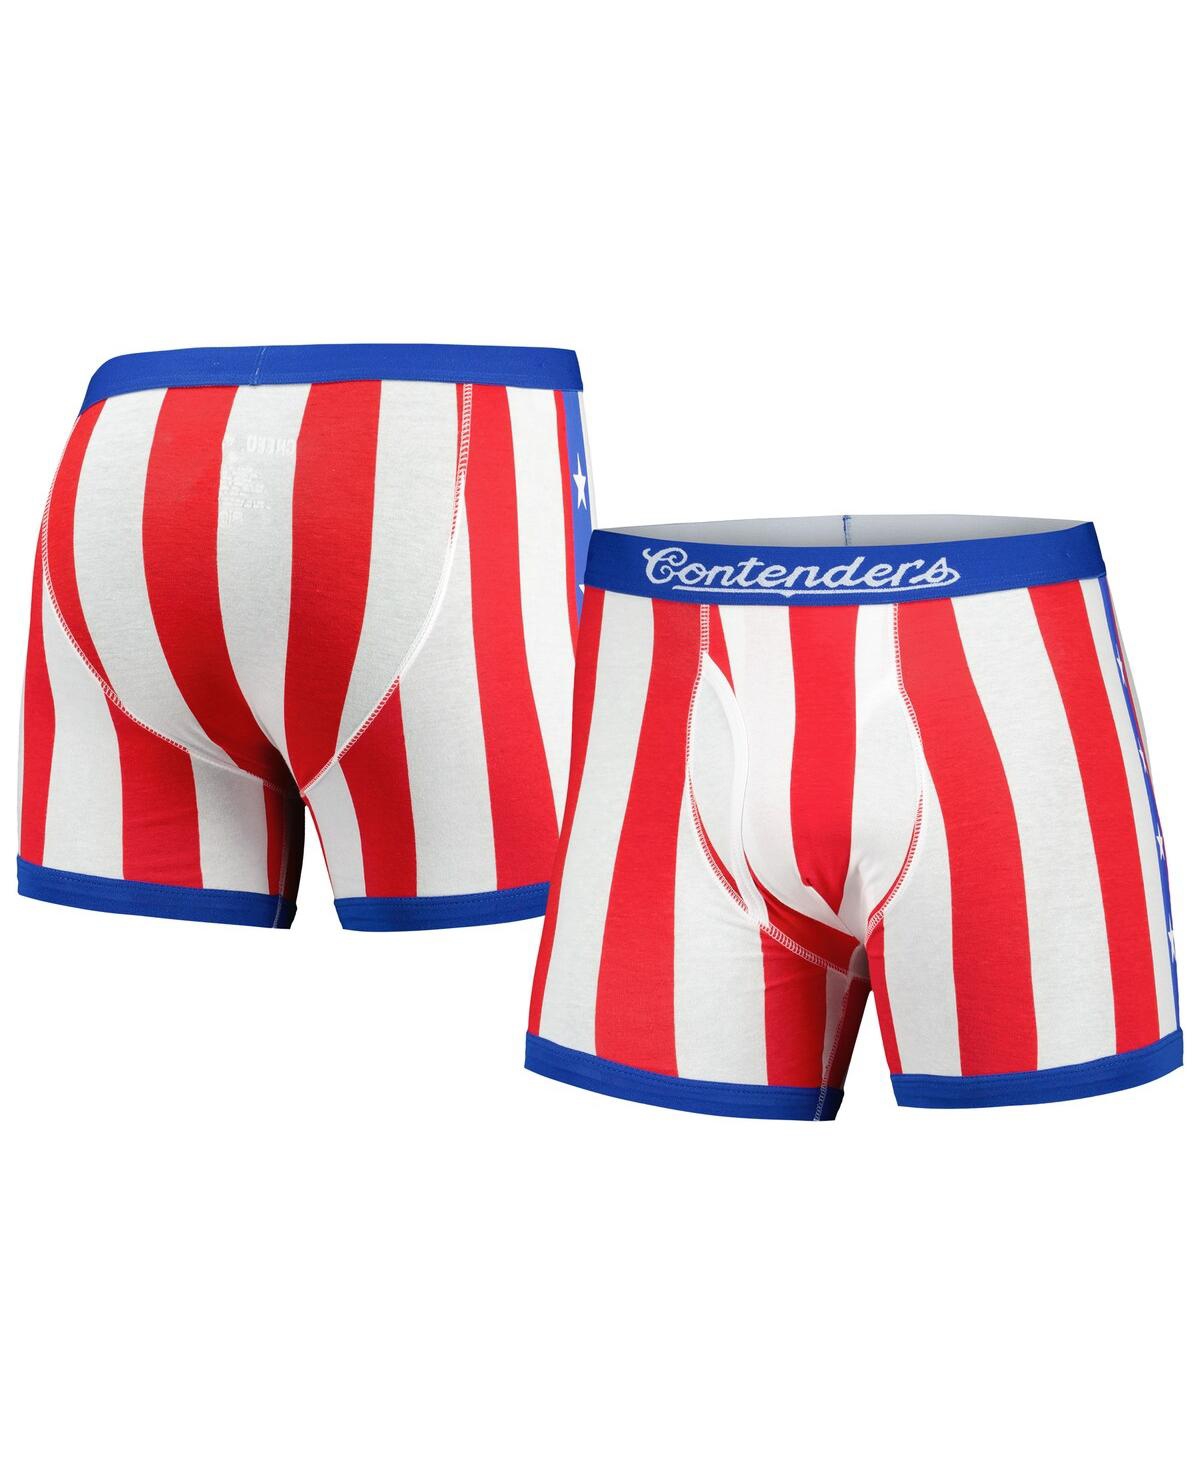 Contenders Clothing Men's  White Rocky I & Iv Apollo Creed Graphic Boxer Briefs